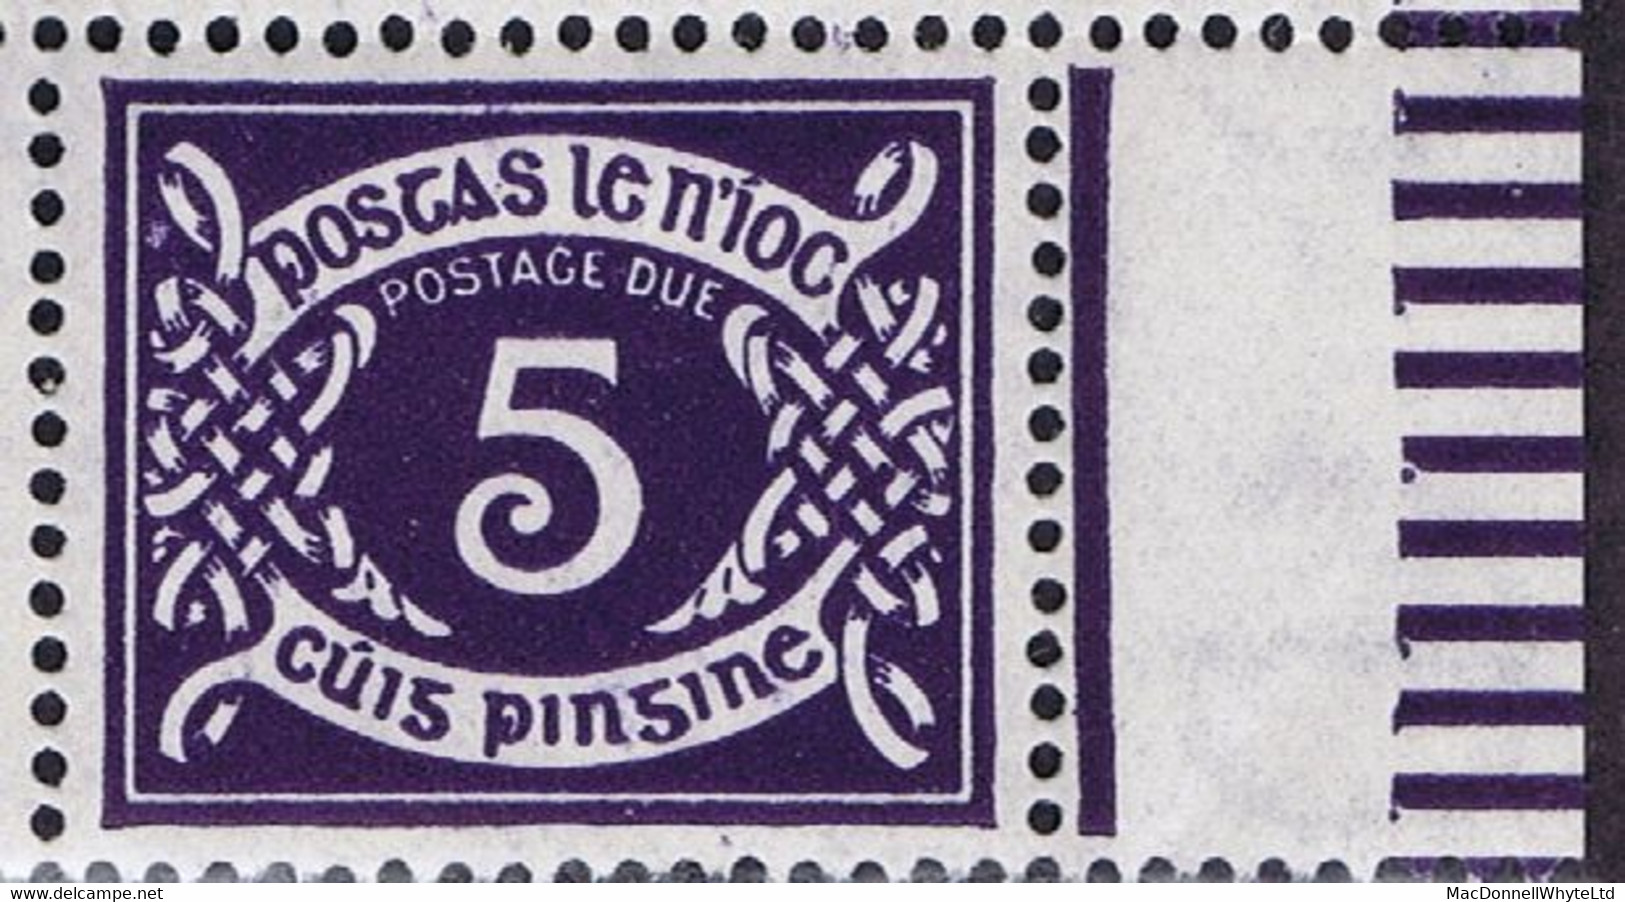 Ireland Postage Dues Varieties Inc 1940-69 E 1d Inverted Q, 2d Aspirate Missing, 5d+8d Watermark Inverted - Strafport